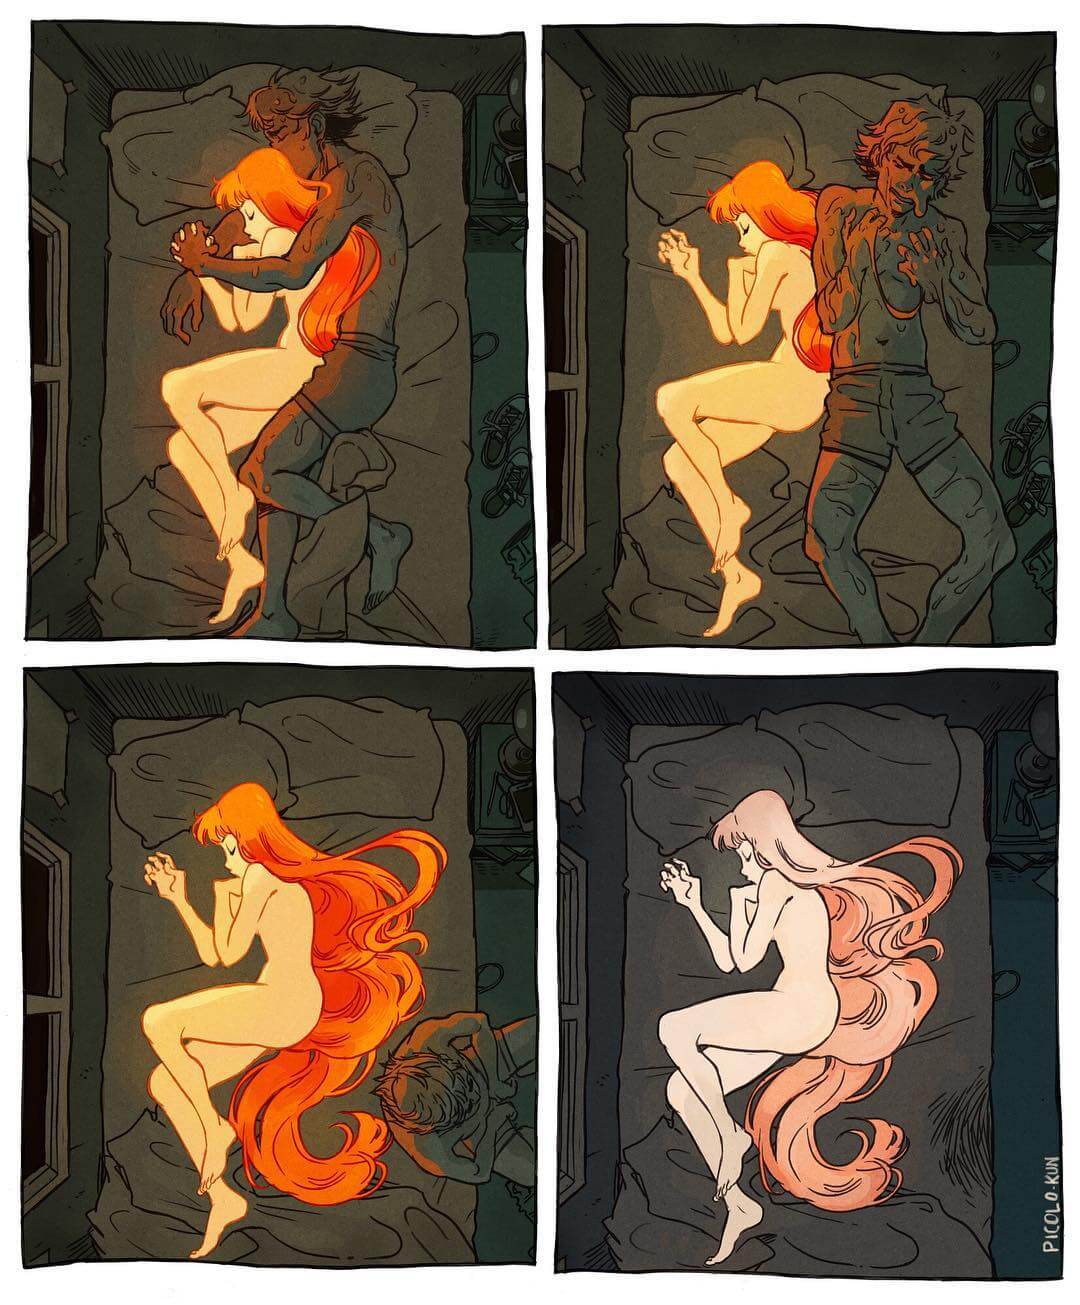 30 Stunning Illustrations Underline The Intensity Between Two Lovers 11